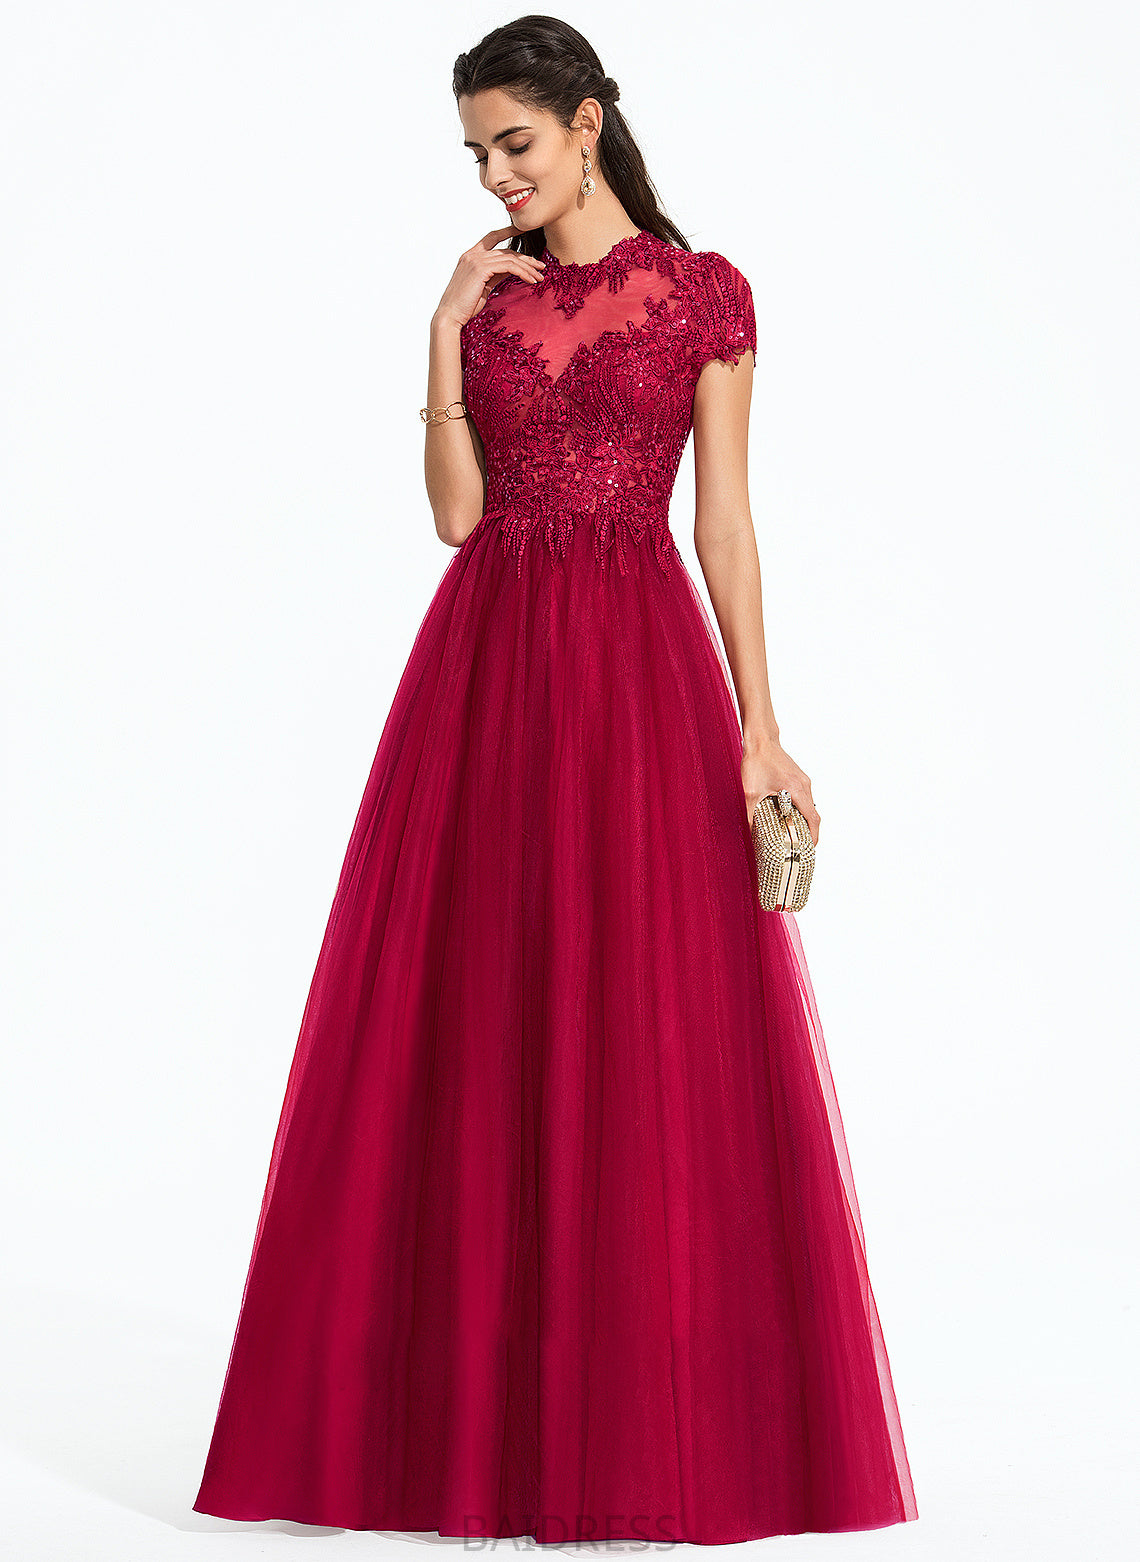 Scoop Ball-Gown/Princess Sequins Tulle Neck With Elsa Prom Dresses Floor-Length